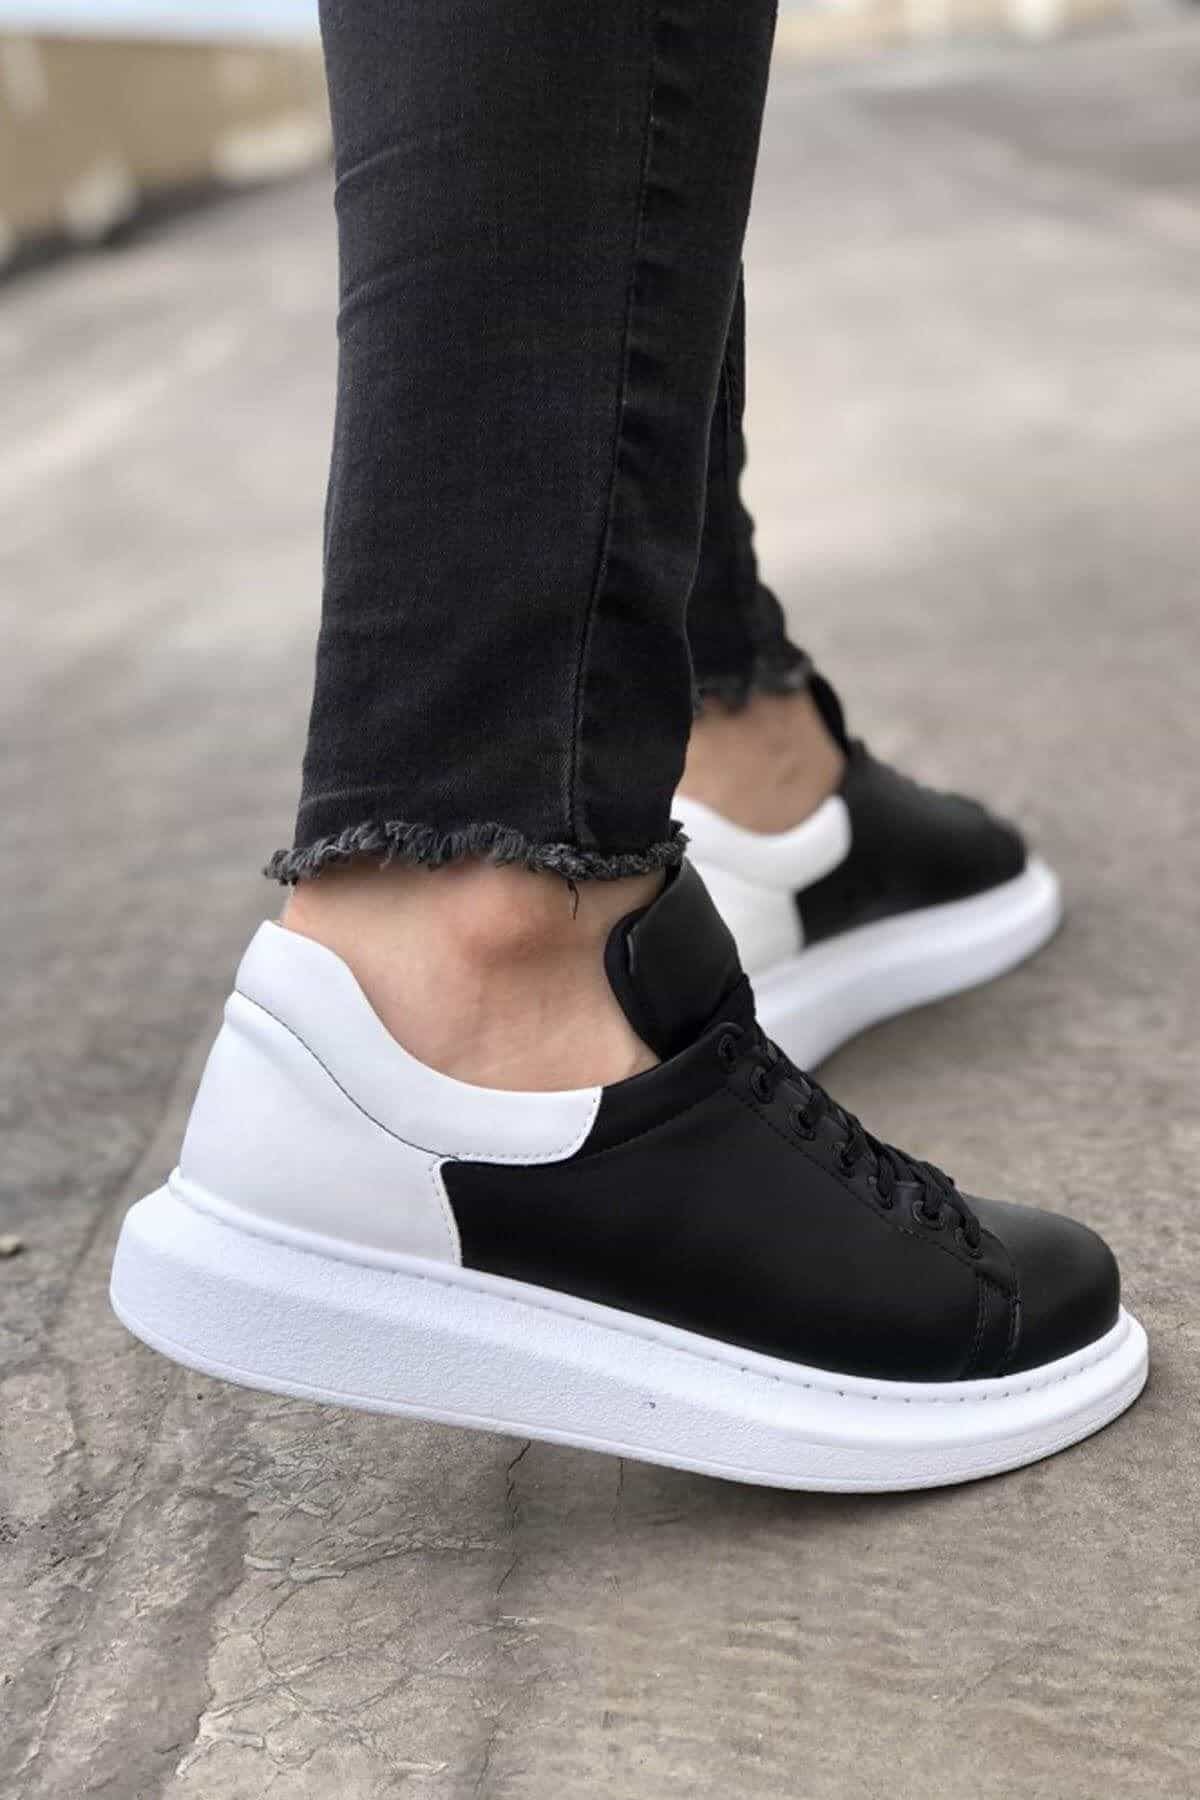 CH256 Men's Unisex Black-White Casual Sneaker Sports Shoes - STREETMODE ™